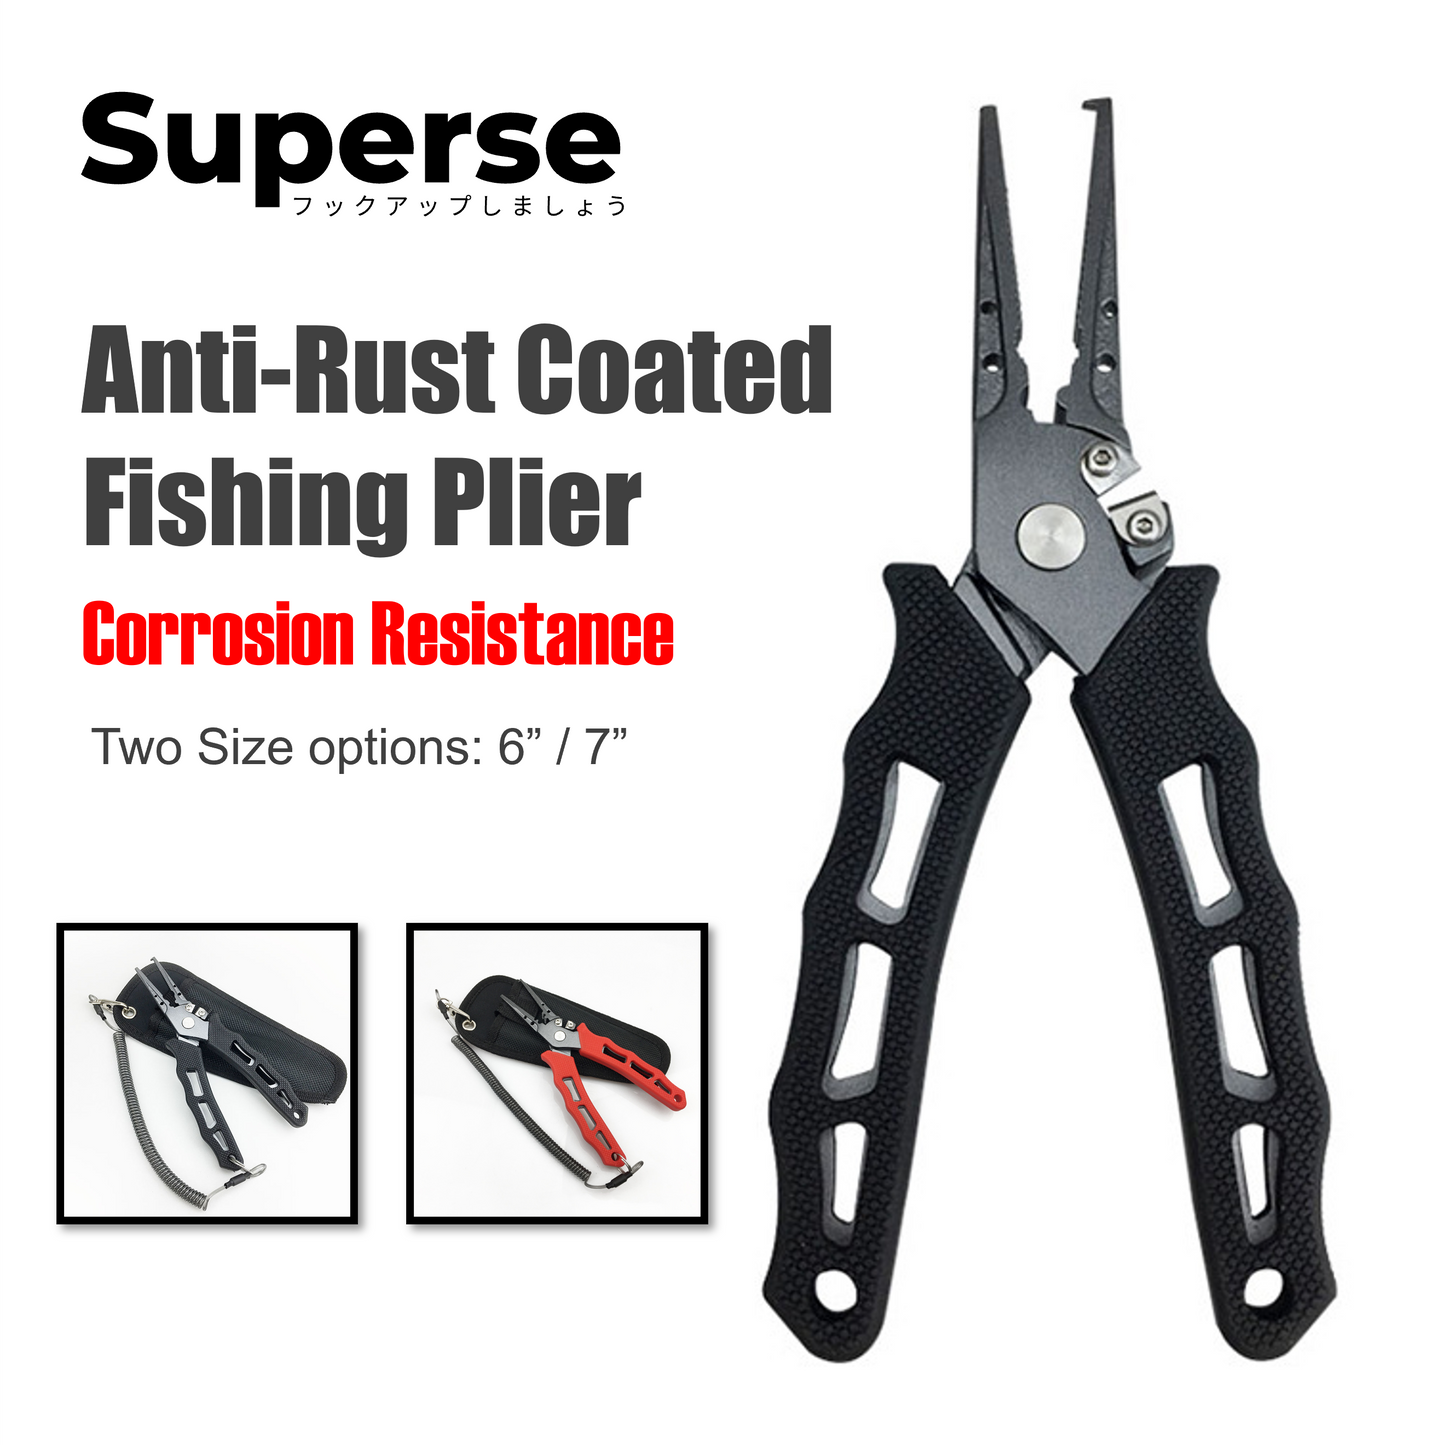 Superse 7 inch Anti-Rust Coated Fishing Plier PL003